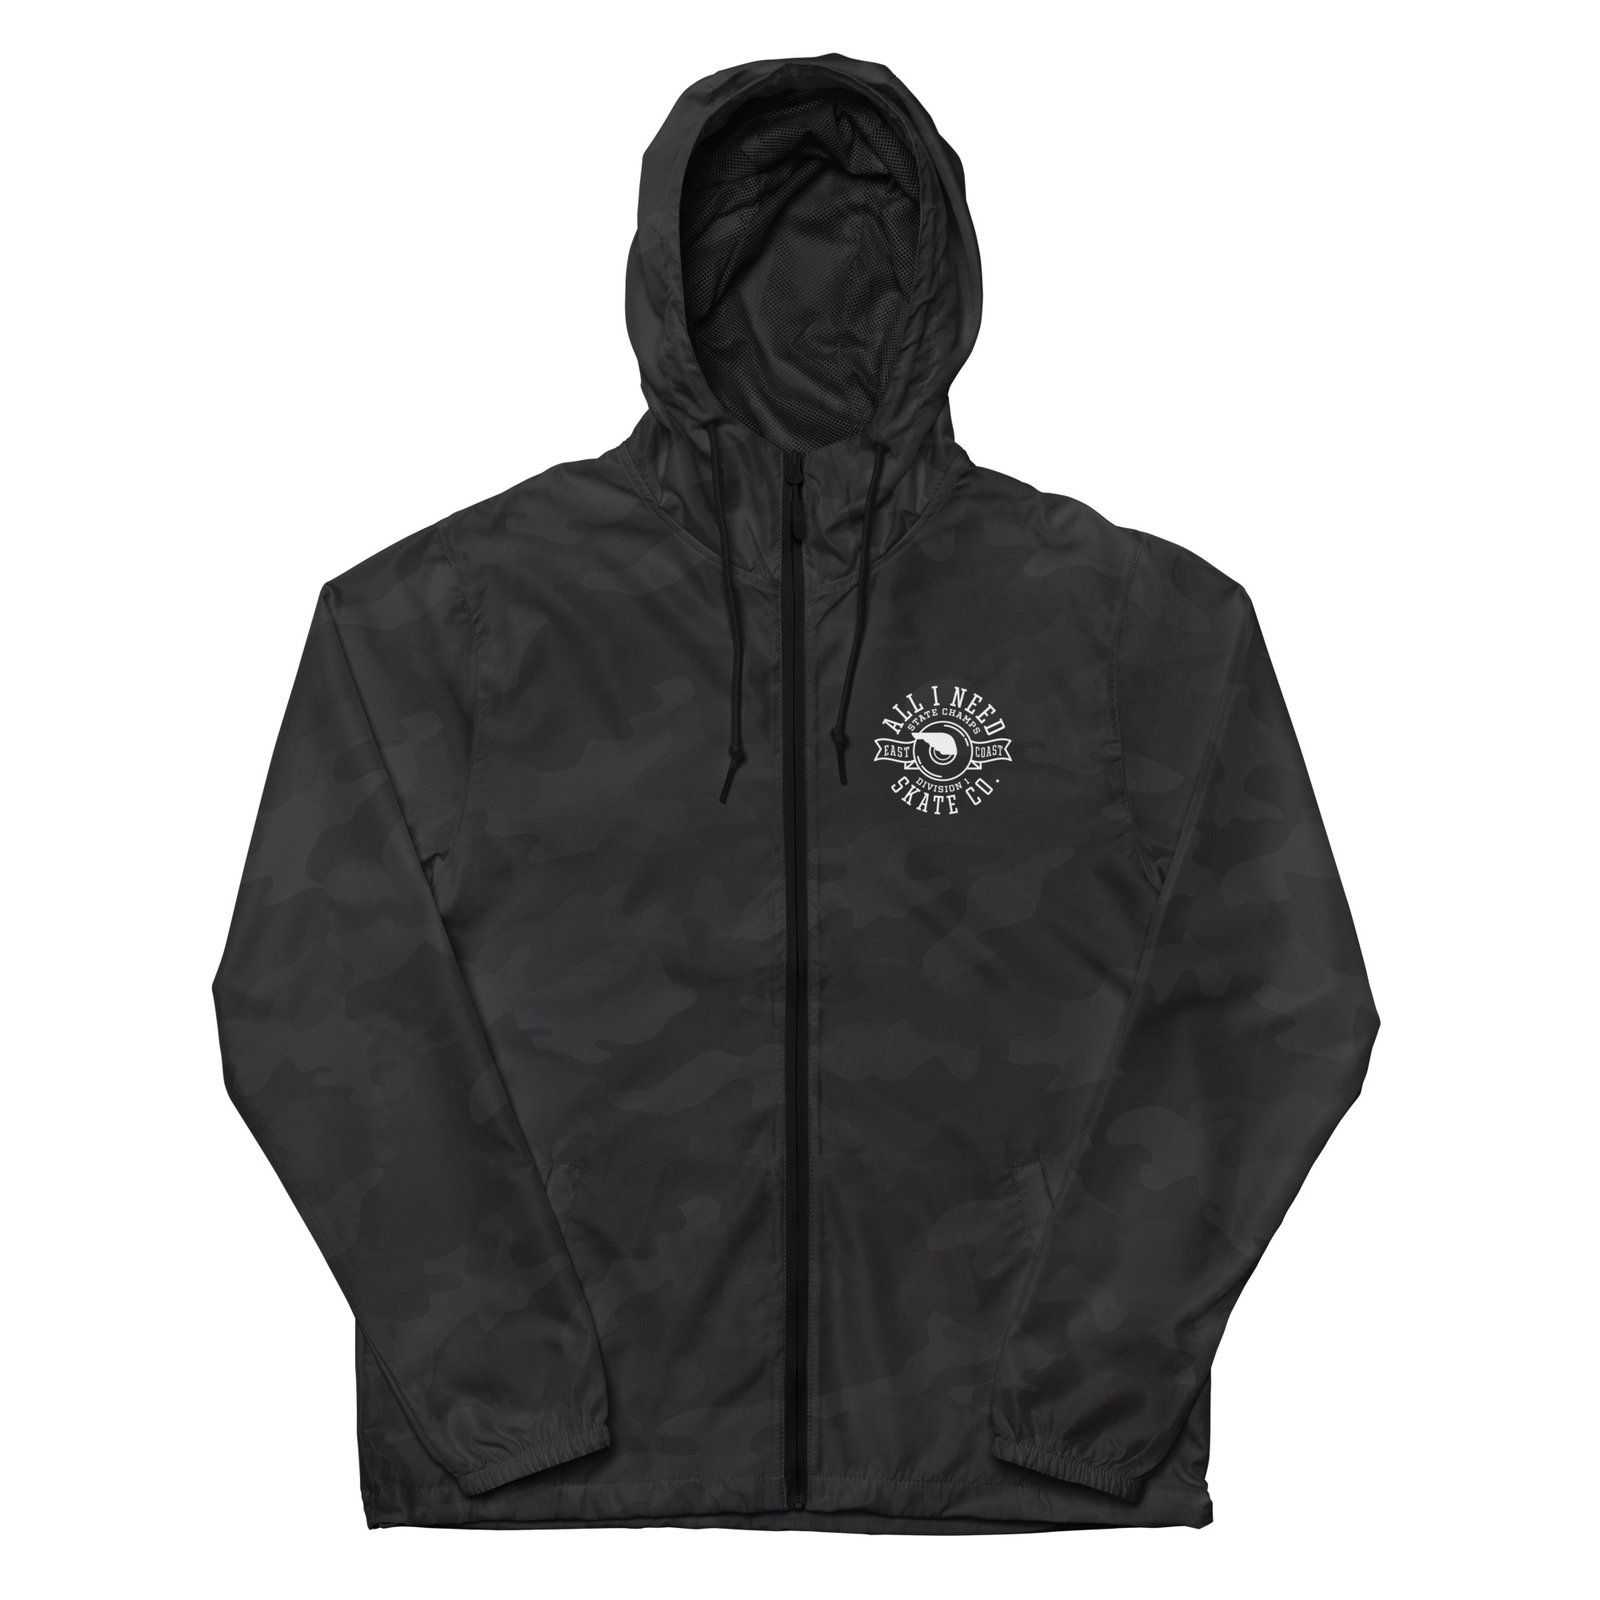 State Champs Unisex lightweight zip up windbreaker | All I Need